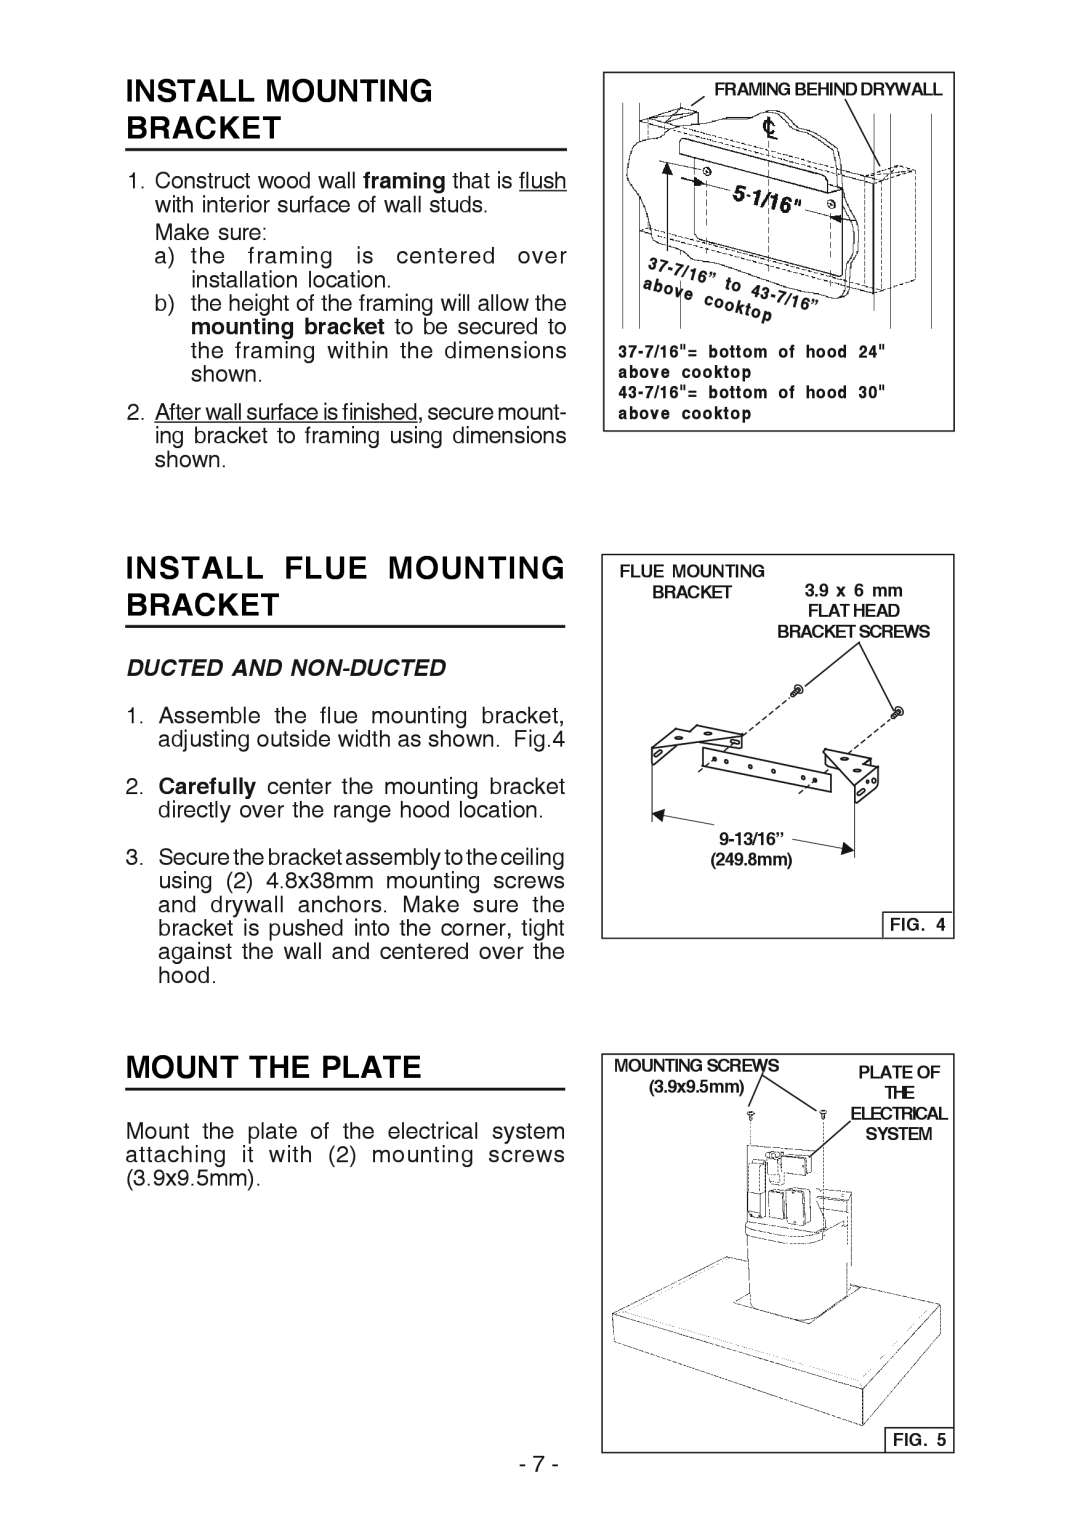 Broan RM533604 manual Install Mounting Bracket, Install Flue Mounting Bracket, Mount The Plate, Ducted And Non-Ducted 